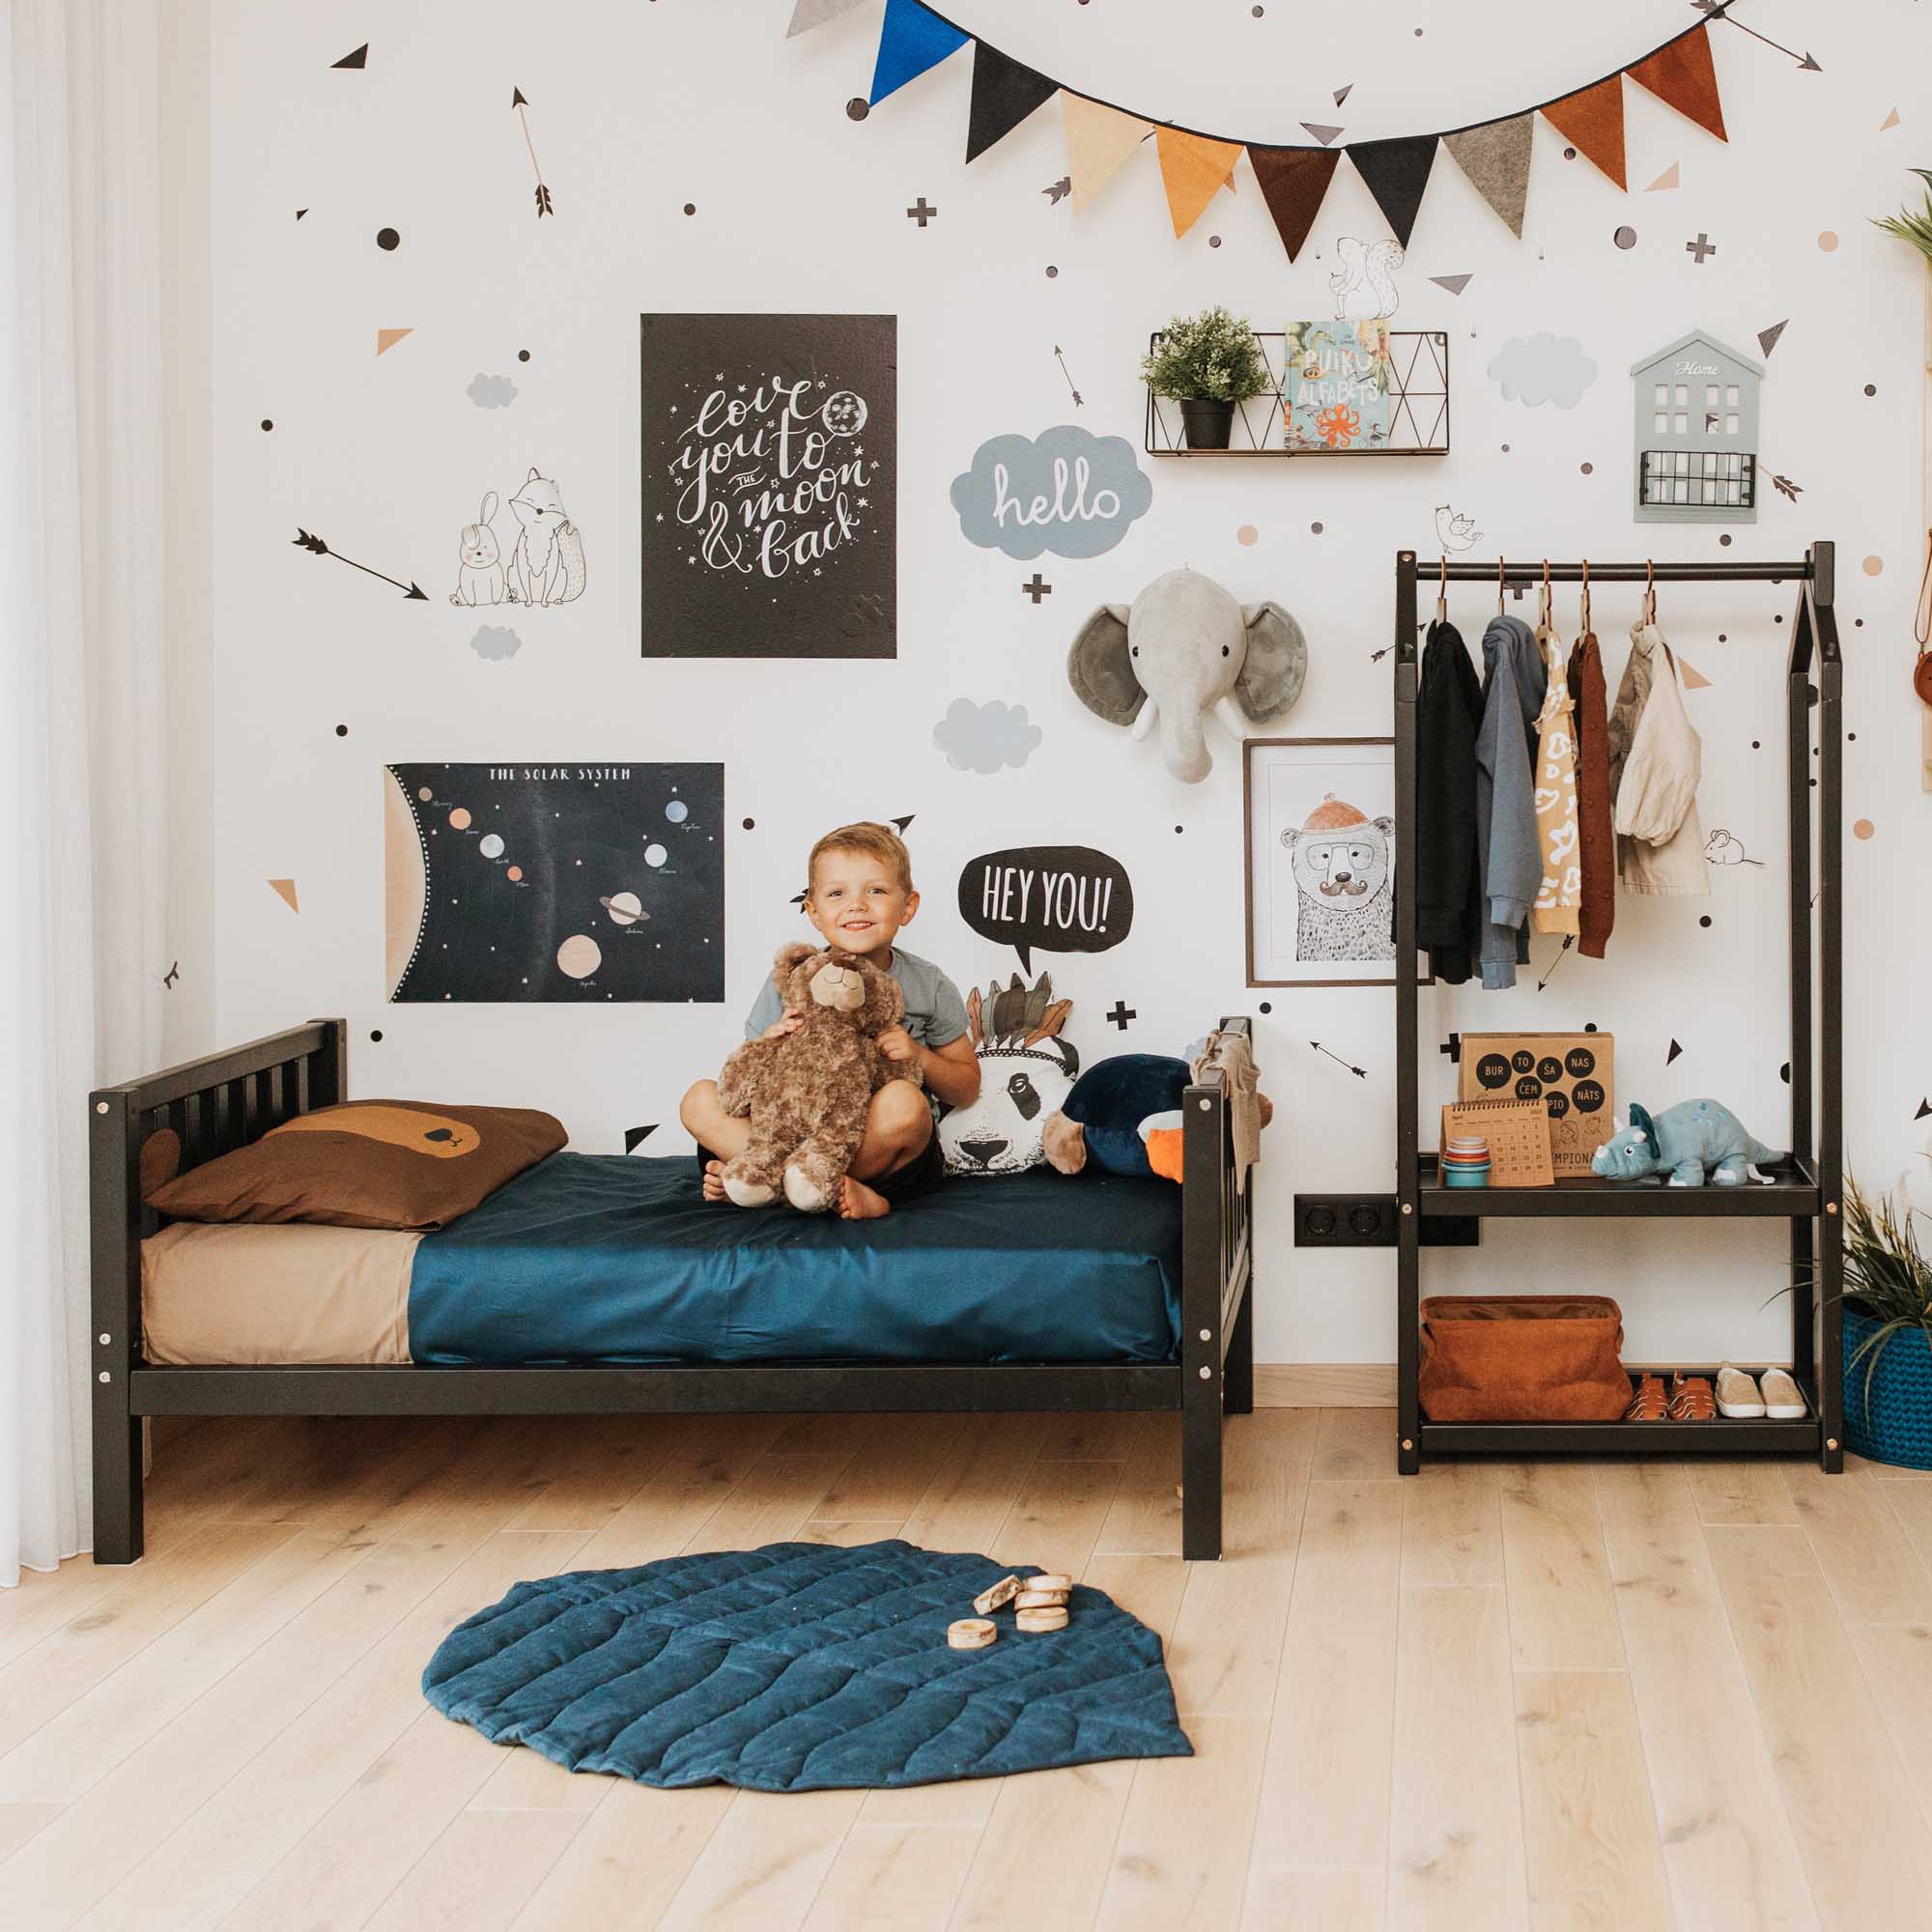 A child's room with a bed, teddy bear, and stuffed animals.